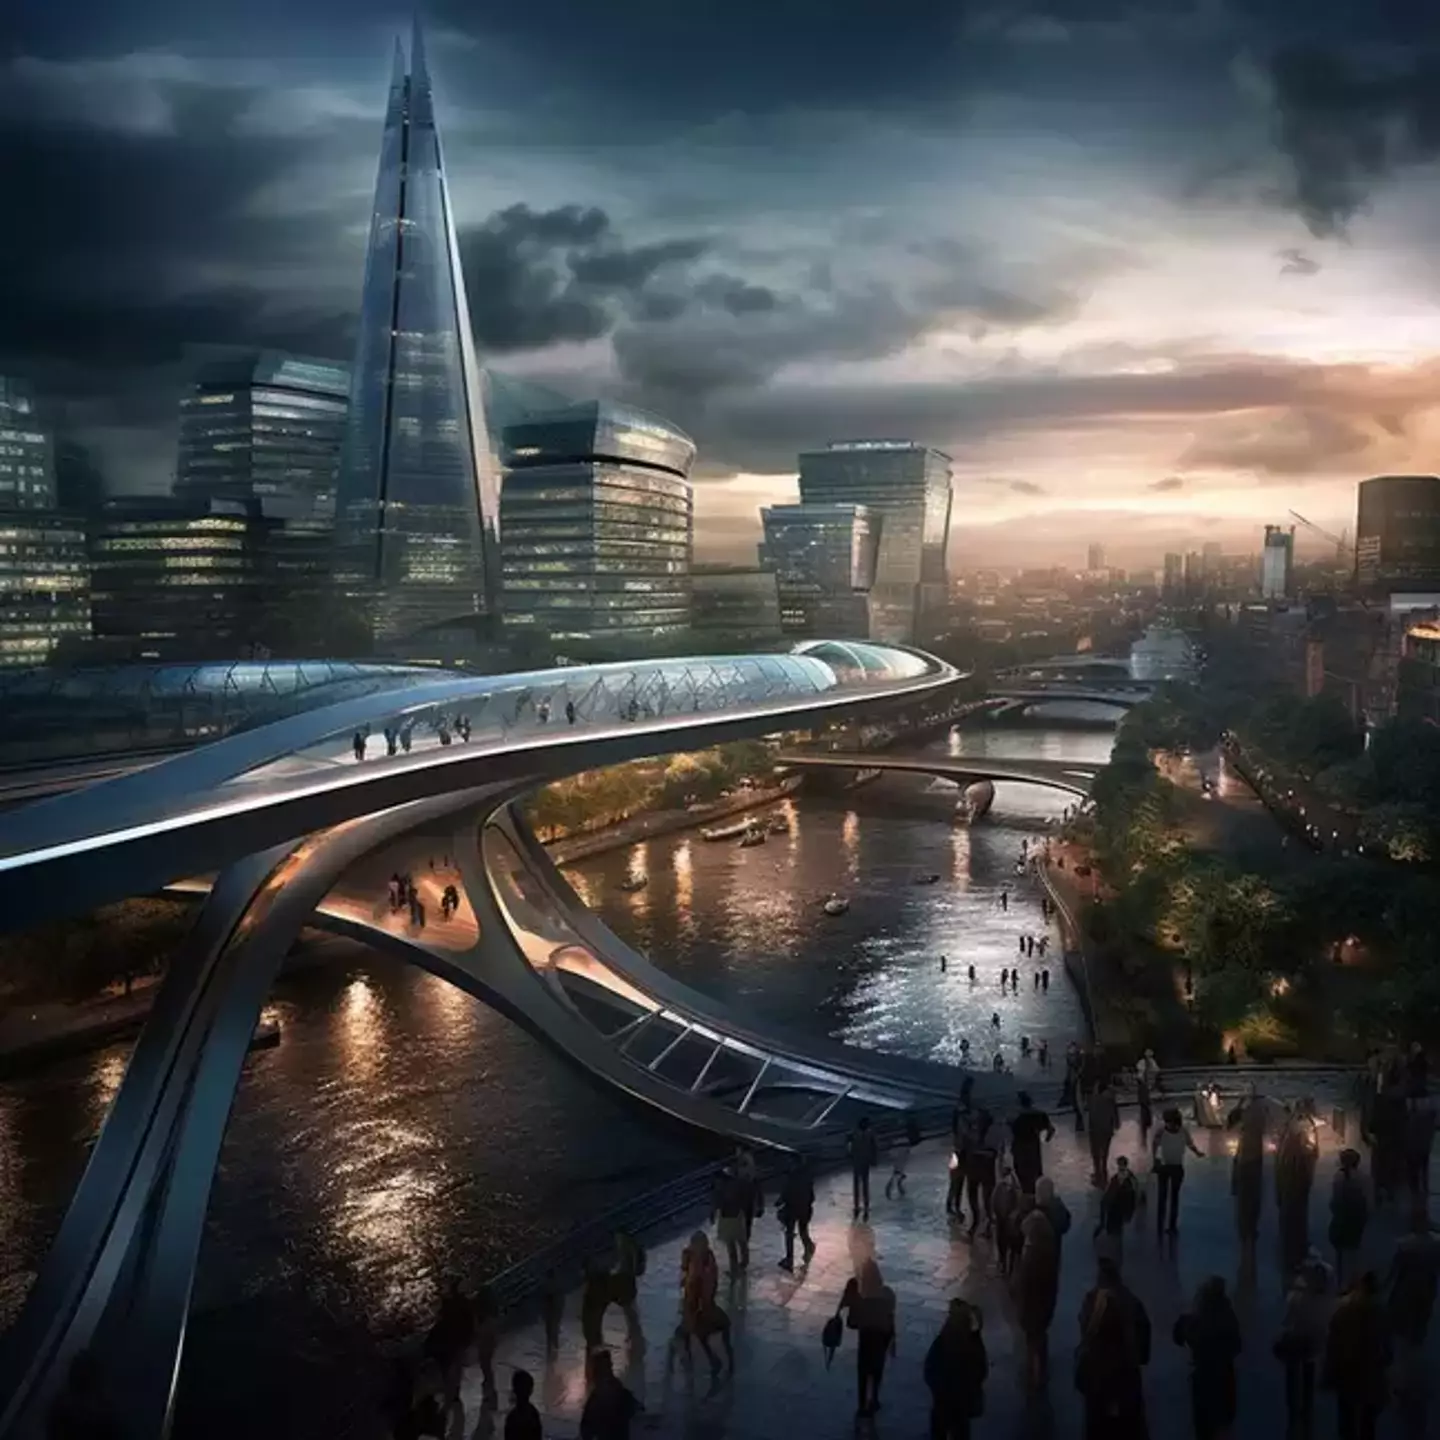 Londoners would no doubt love a pedestrian bridge like this.